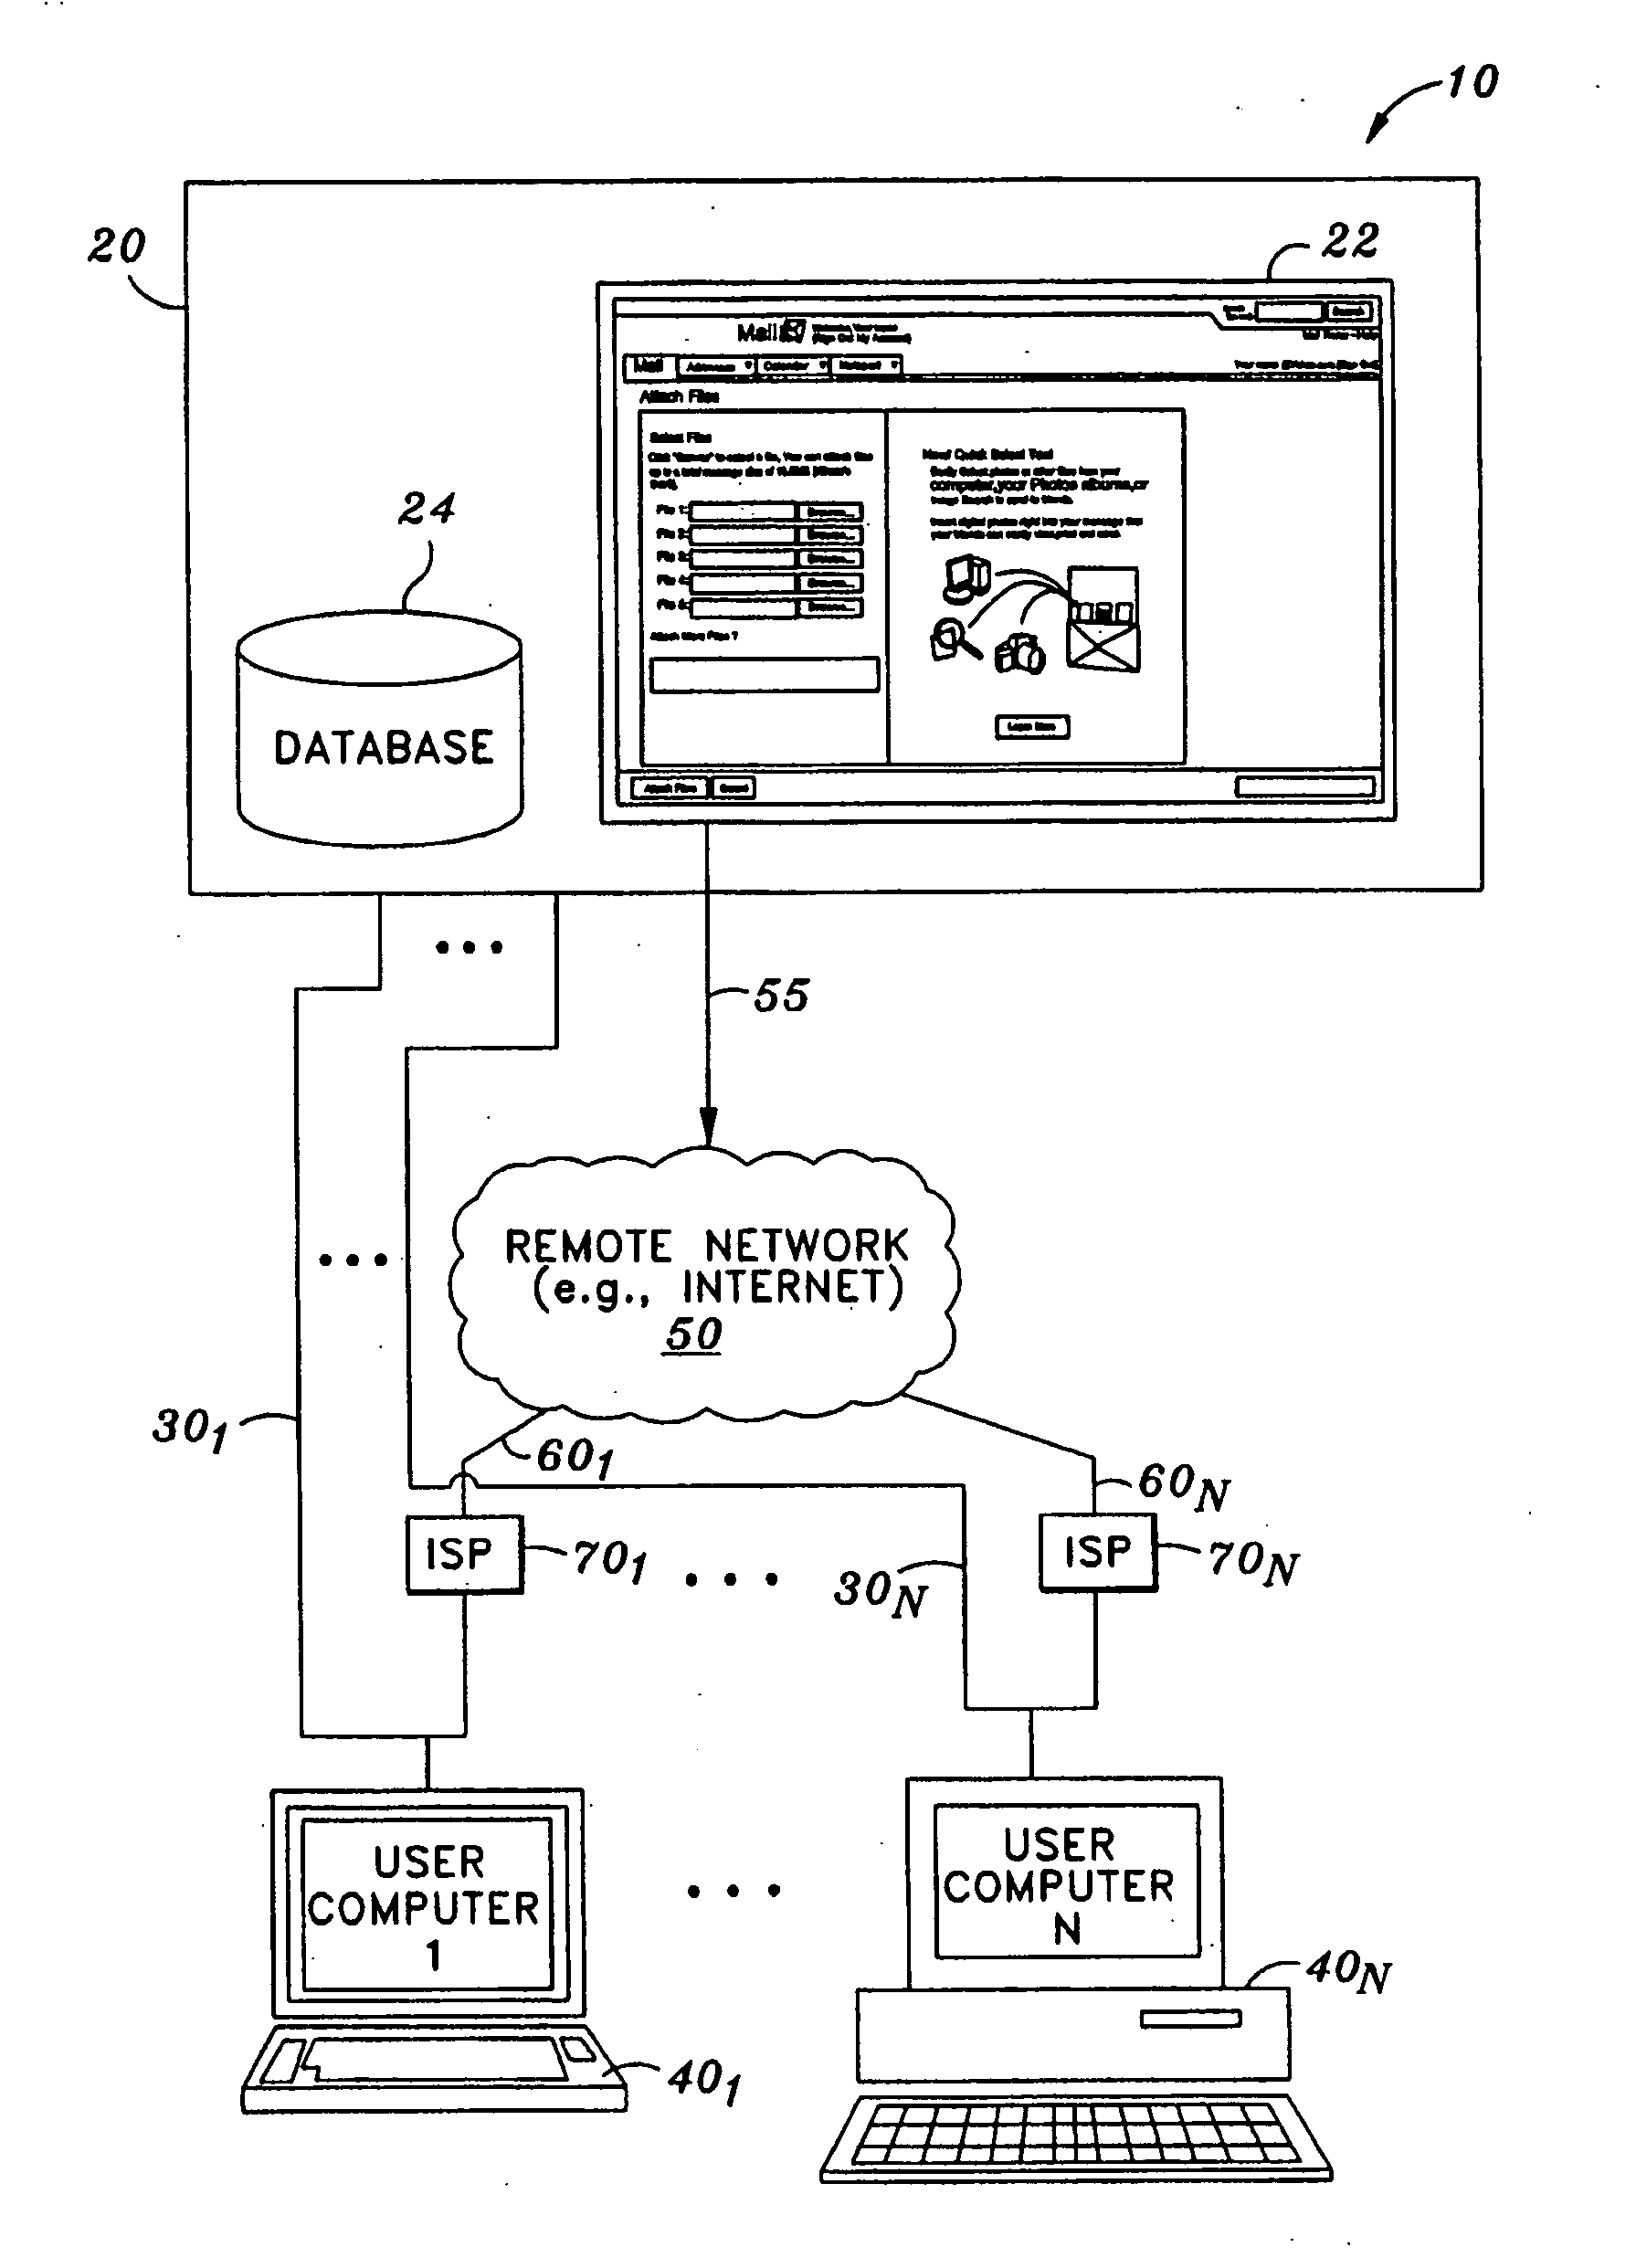 System and method for selecting and managing files